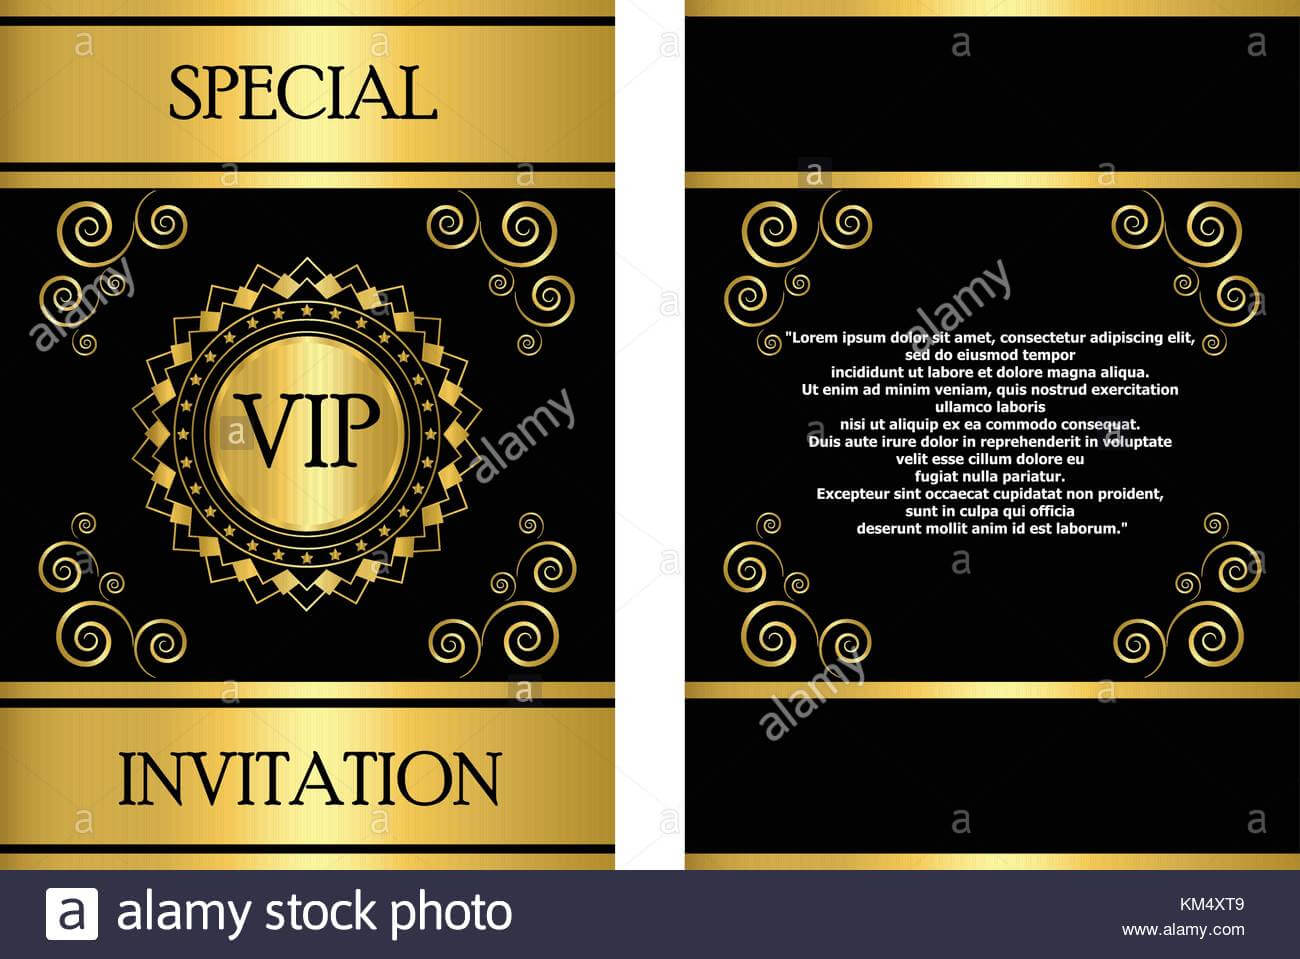 A Golden Vip Invitation Card Template That Can Be Used For For Event Invitation Card Template